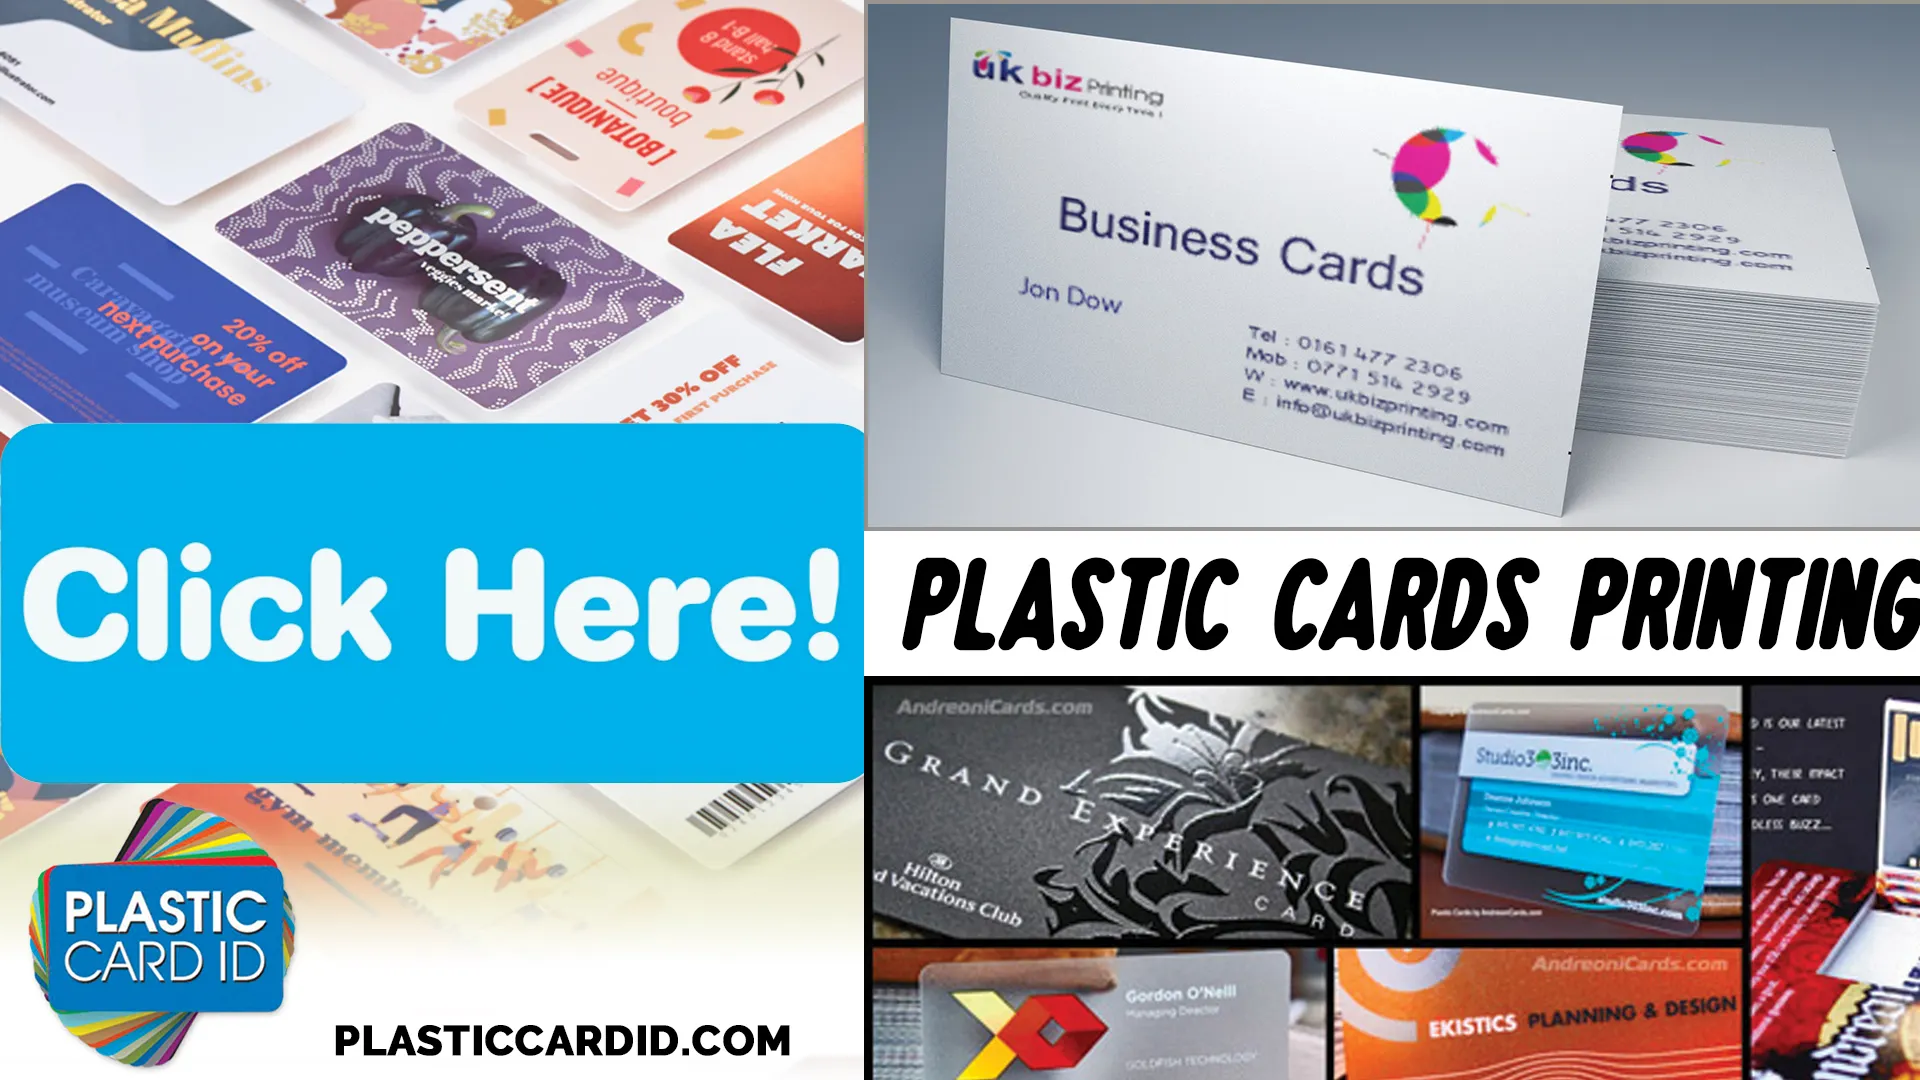 Create an Impact with Every Card You Print